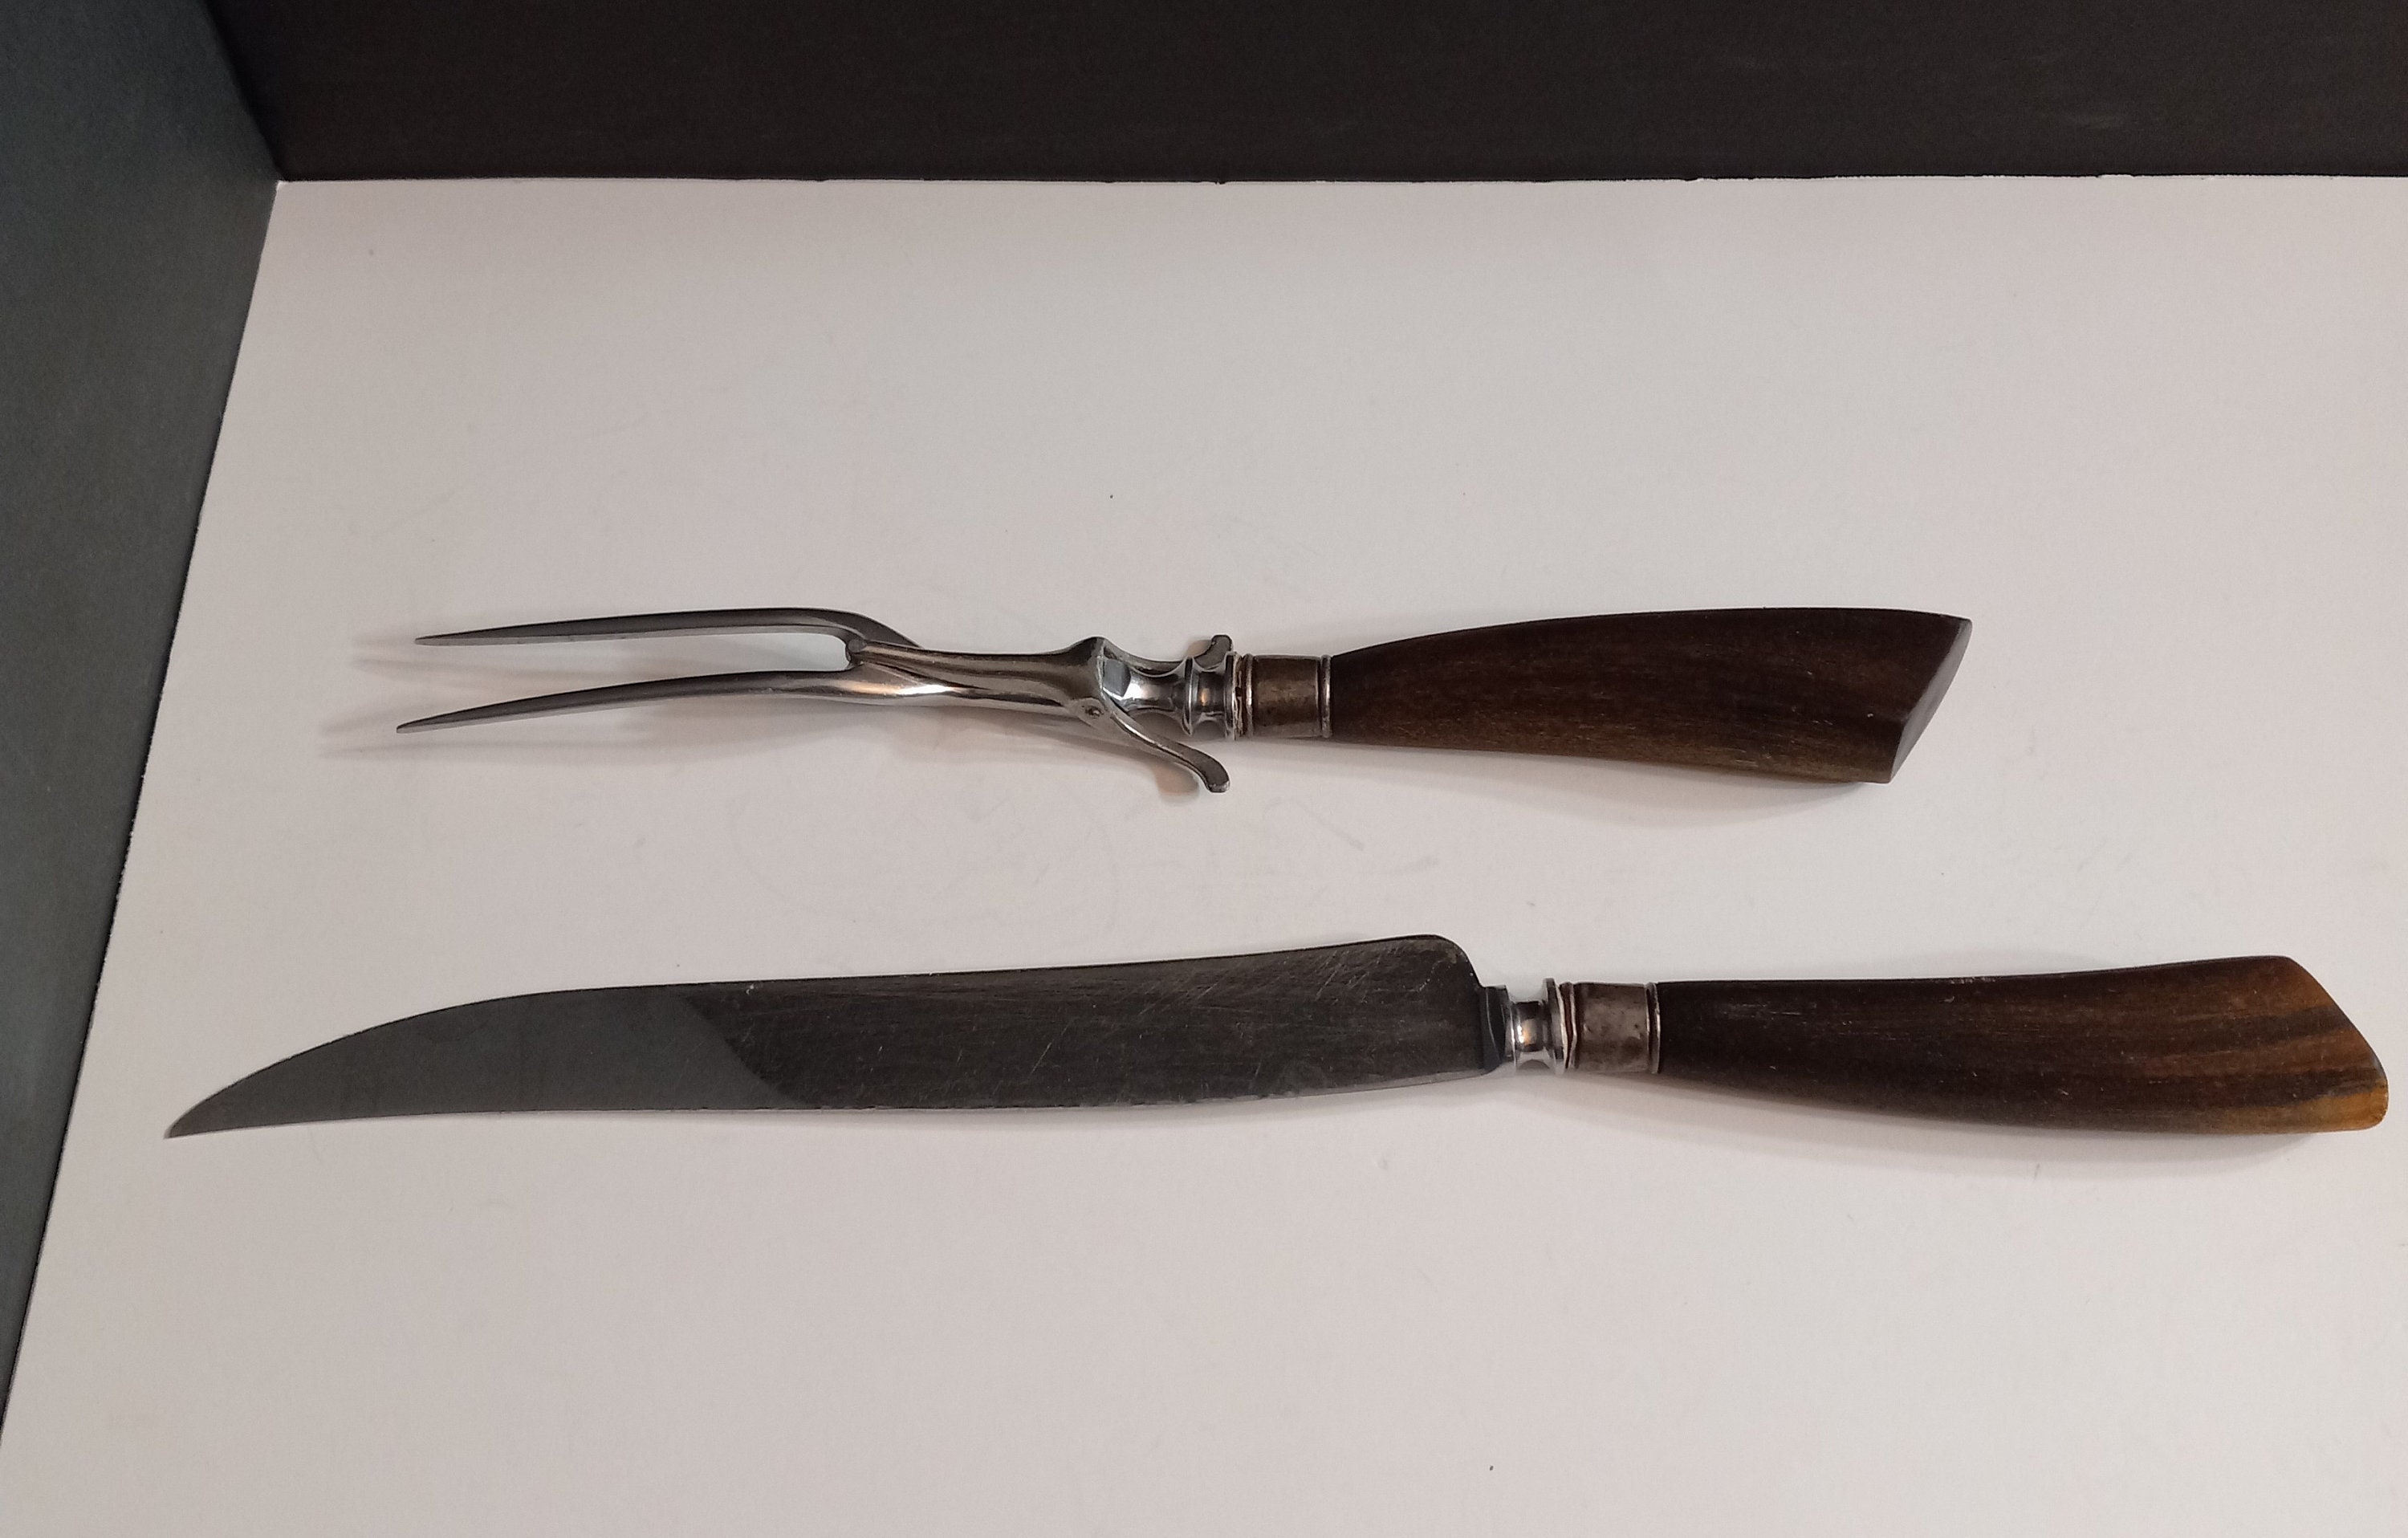 CLEARANCE Waterford Crystal CARVING Set Knife and Fork LISMORE With Round  Handles Pre-owned in Very Good Condition 111 Dhm 